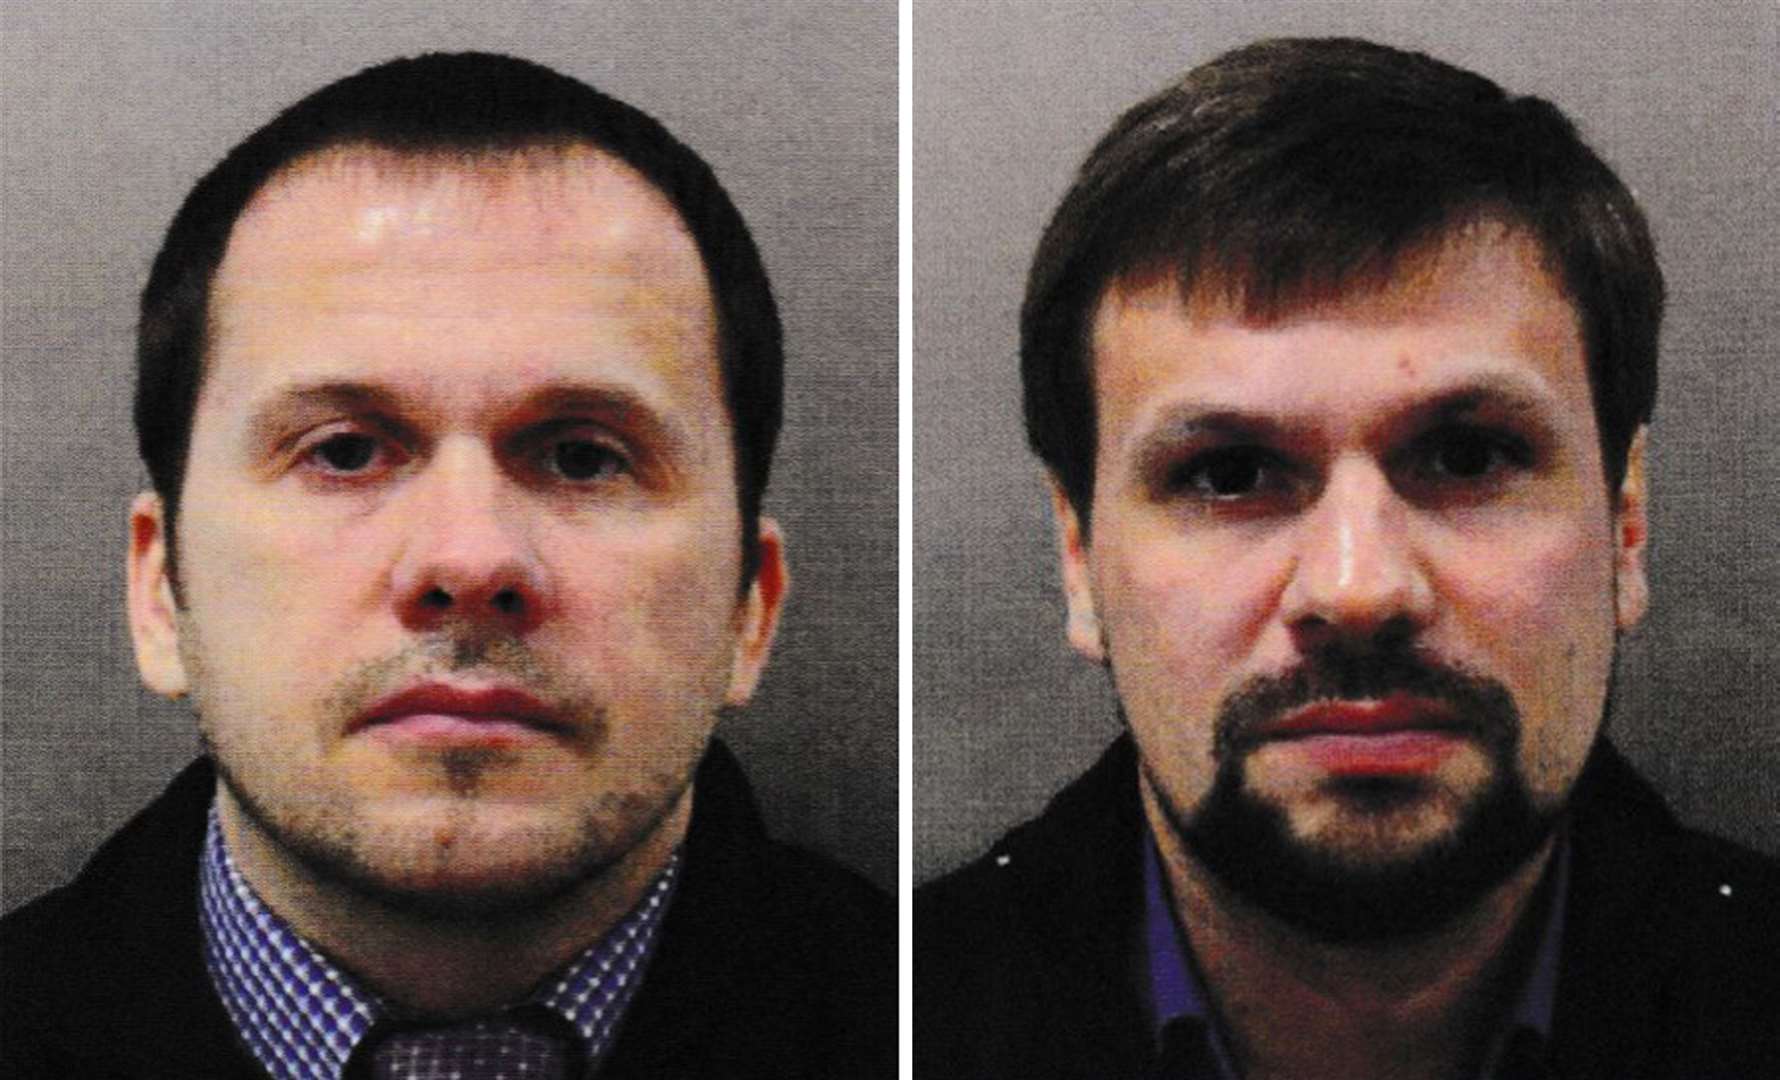 Alexander Petrov, left, and Ruslan Boshirov were alleged to have carried out the Salisbury poisonings (Metropolitan Police/PA)